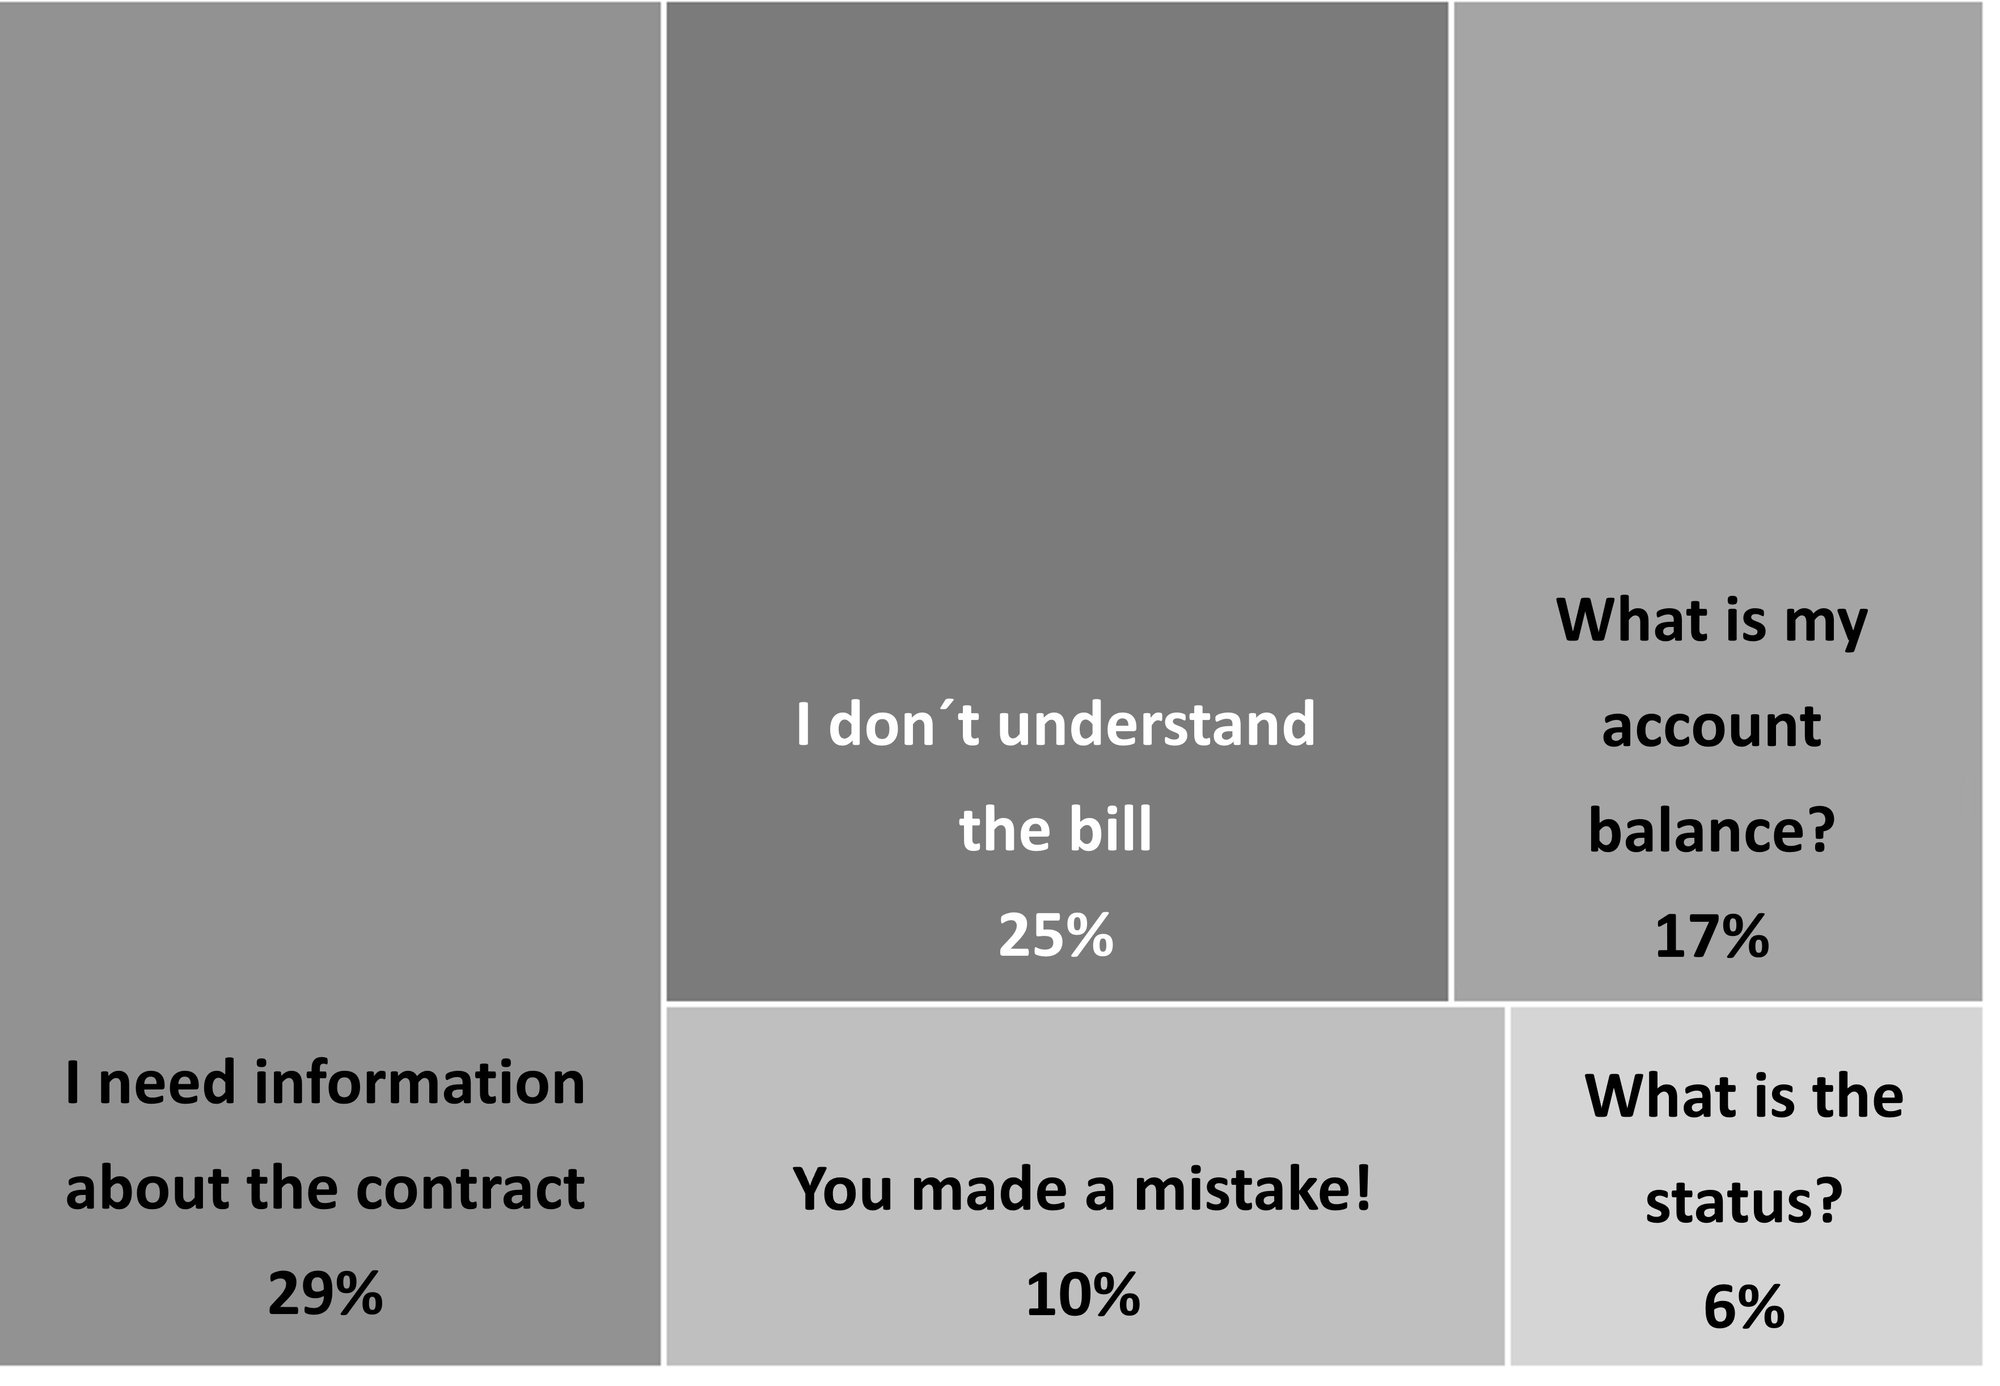 Percentage of related customer concerns: I need information about the contract: 29 %, I don't understand the bill: 24 %, What is my account balance?: 17 %, You made a mistake!: 10 %, What is the status?: 6 %